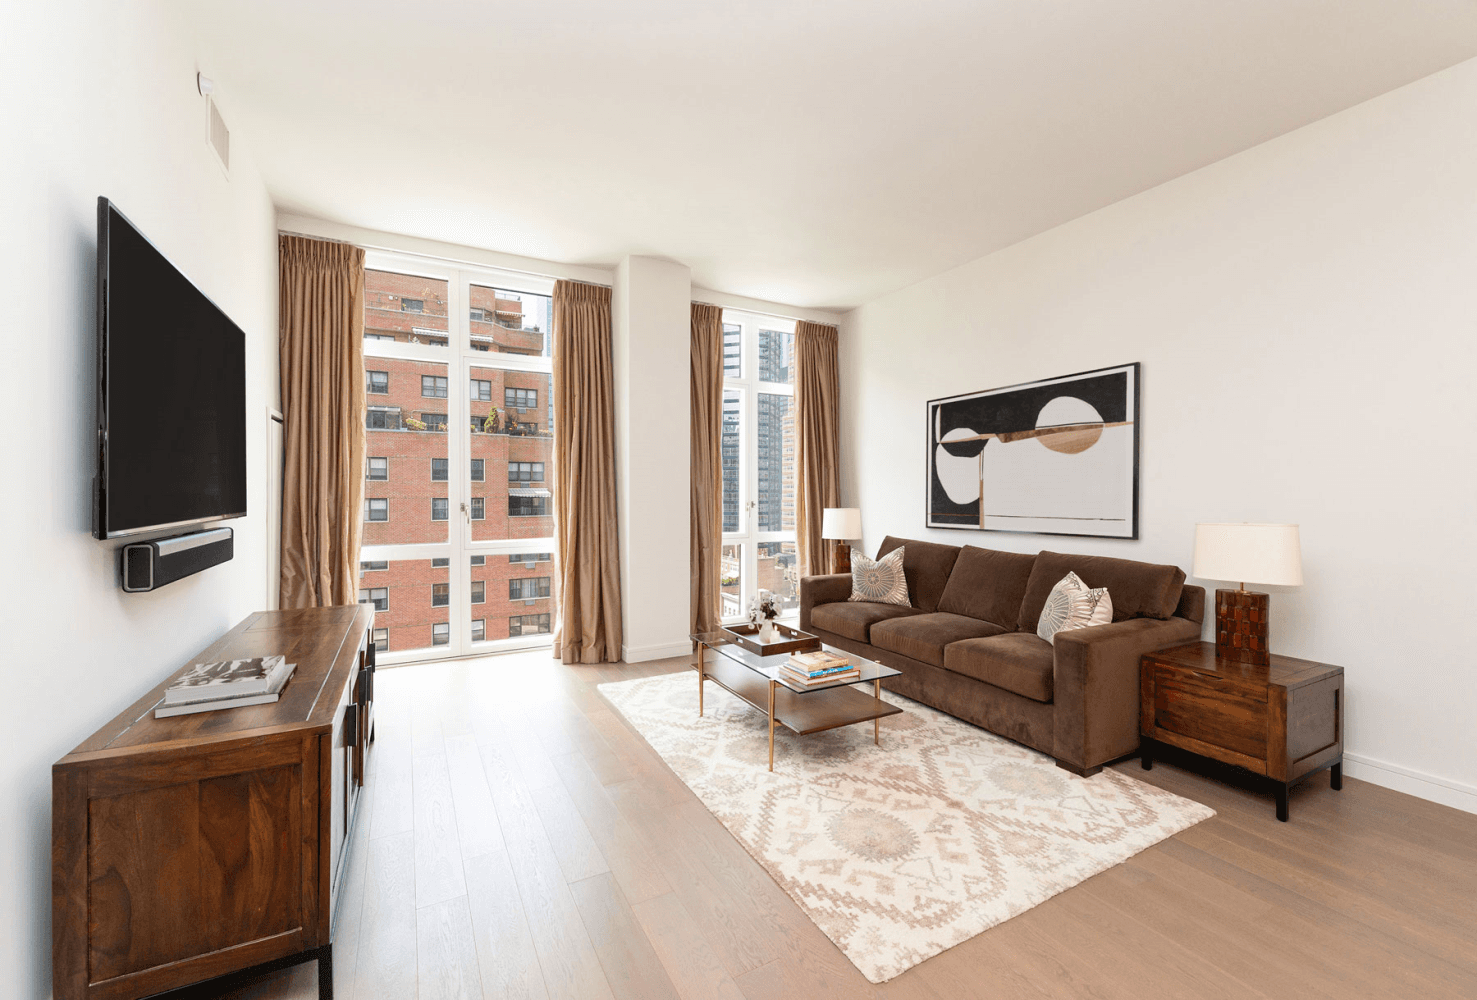 SPACIOUS AND STYLISH 2 BEDROOM, 2 BATHROOM CONDOMINIUM WITH OPEN CITY VIEWS OFFERED FURNISHED OR UNFURNISHED.